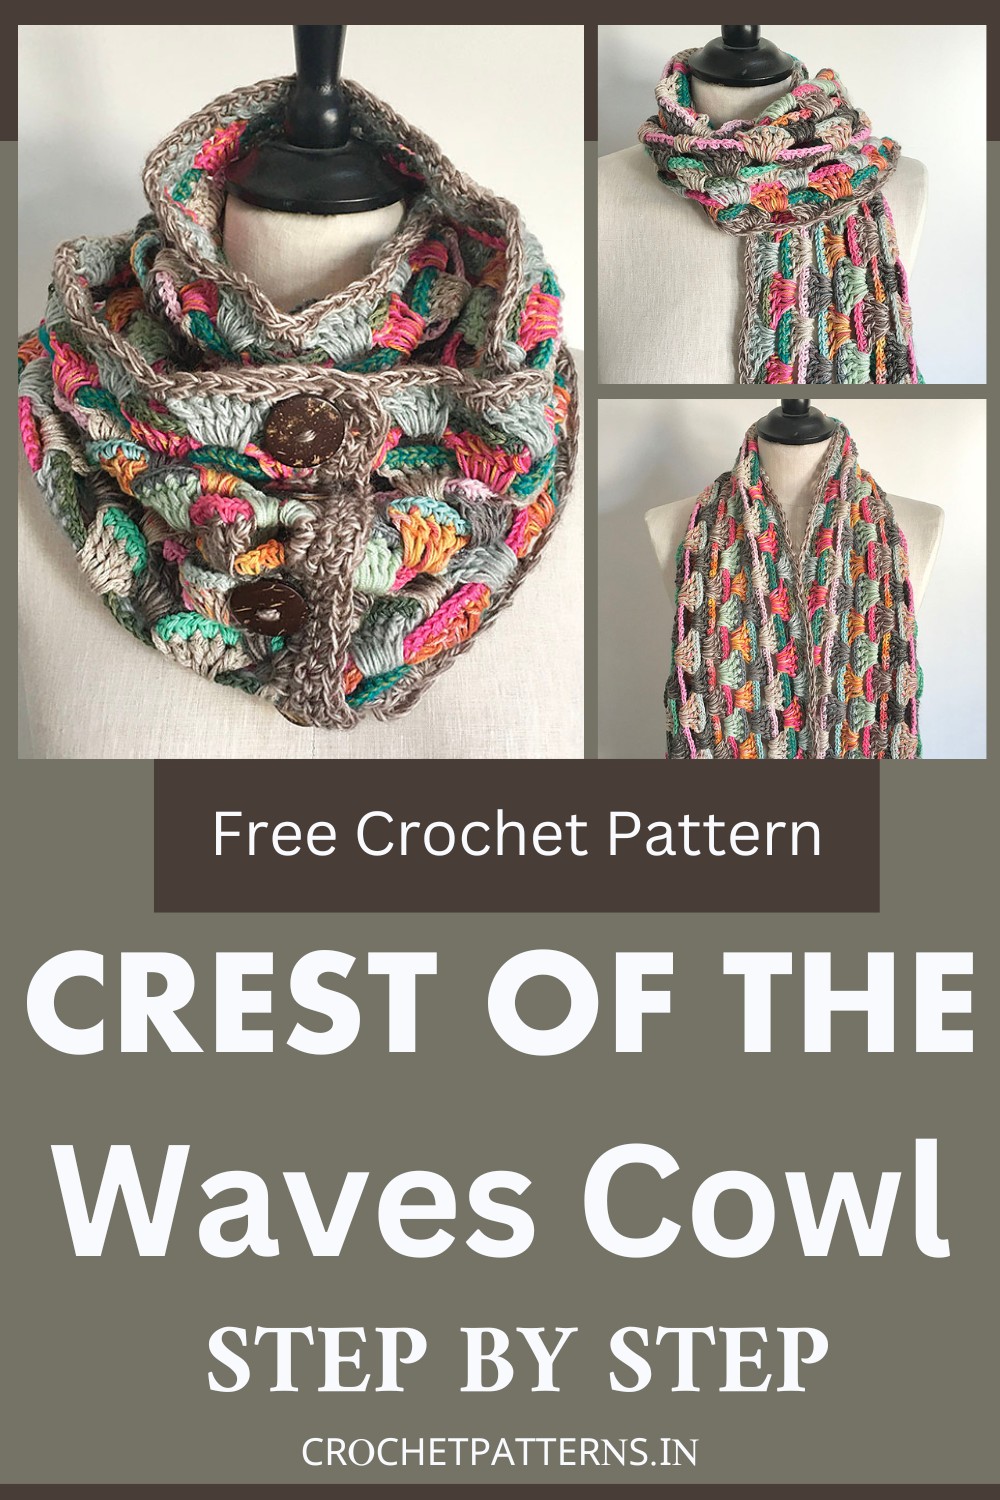 Crochet Crest of the Waves Cowl